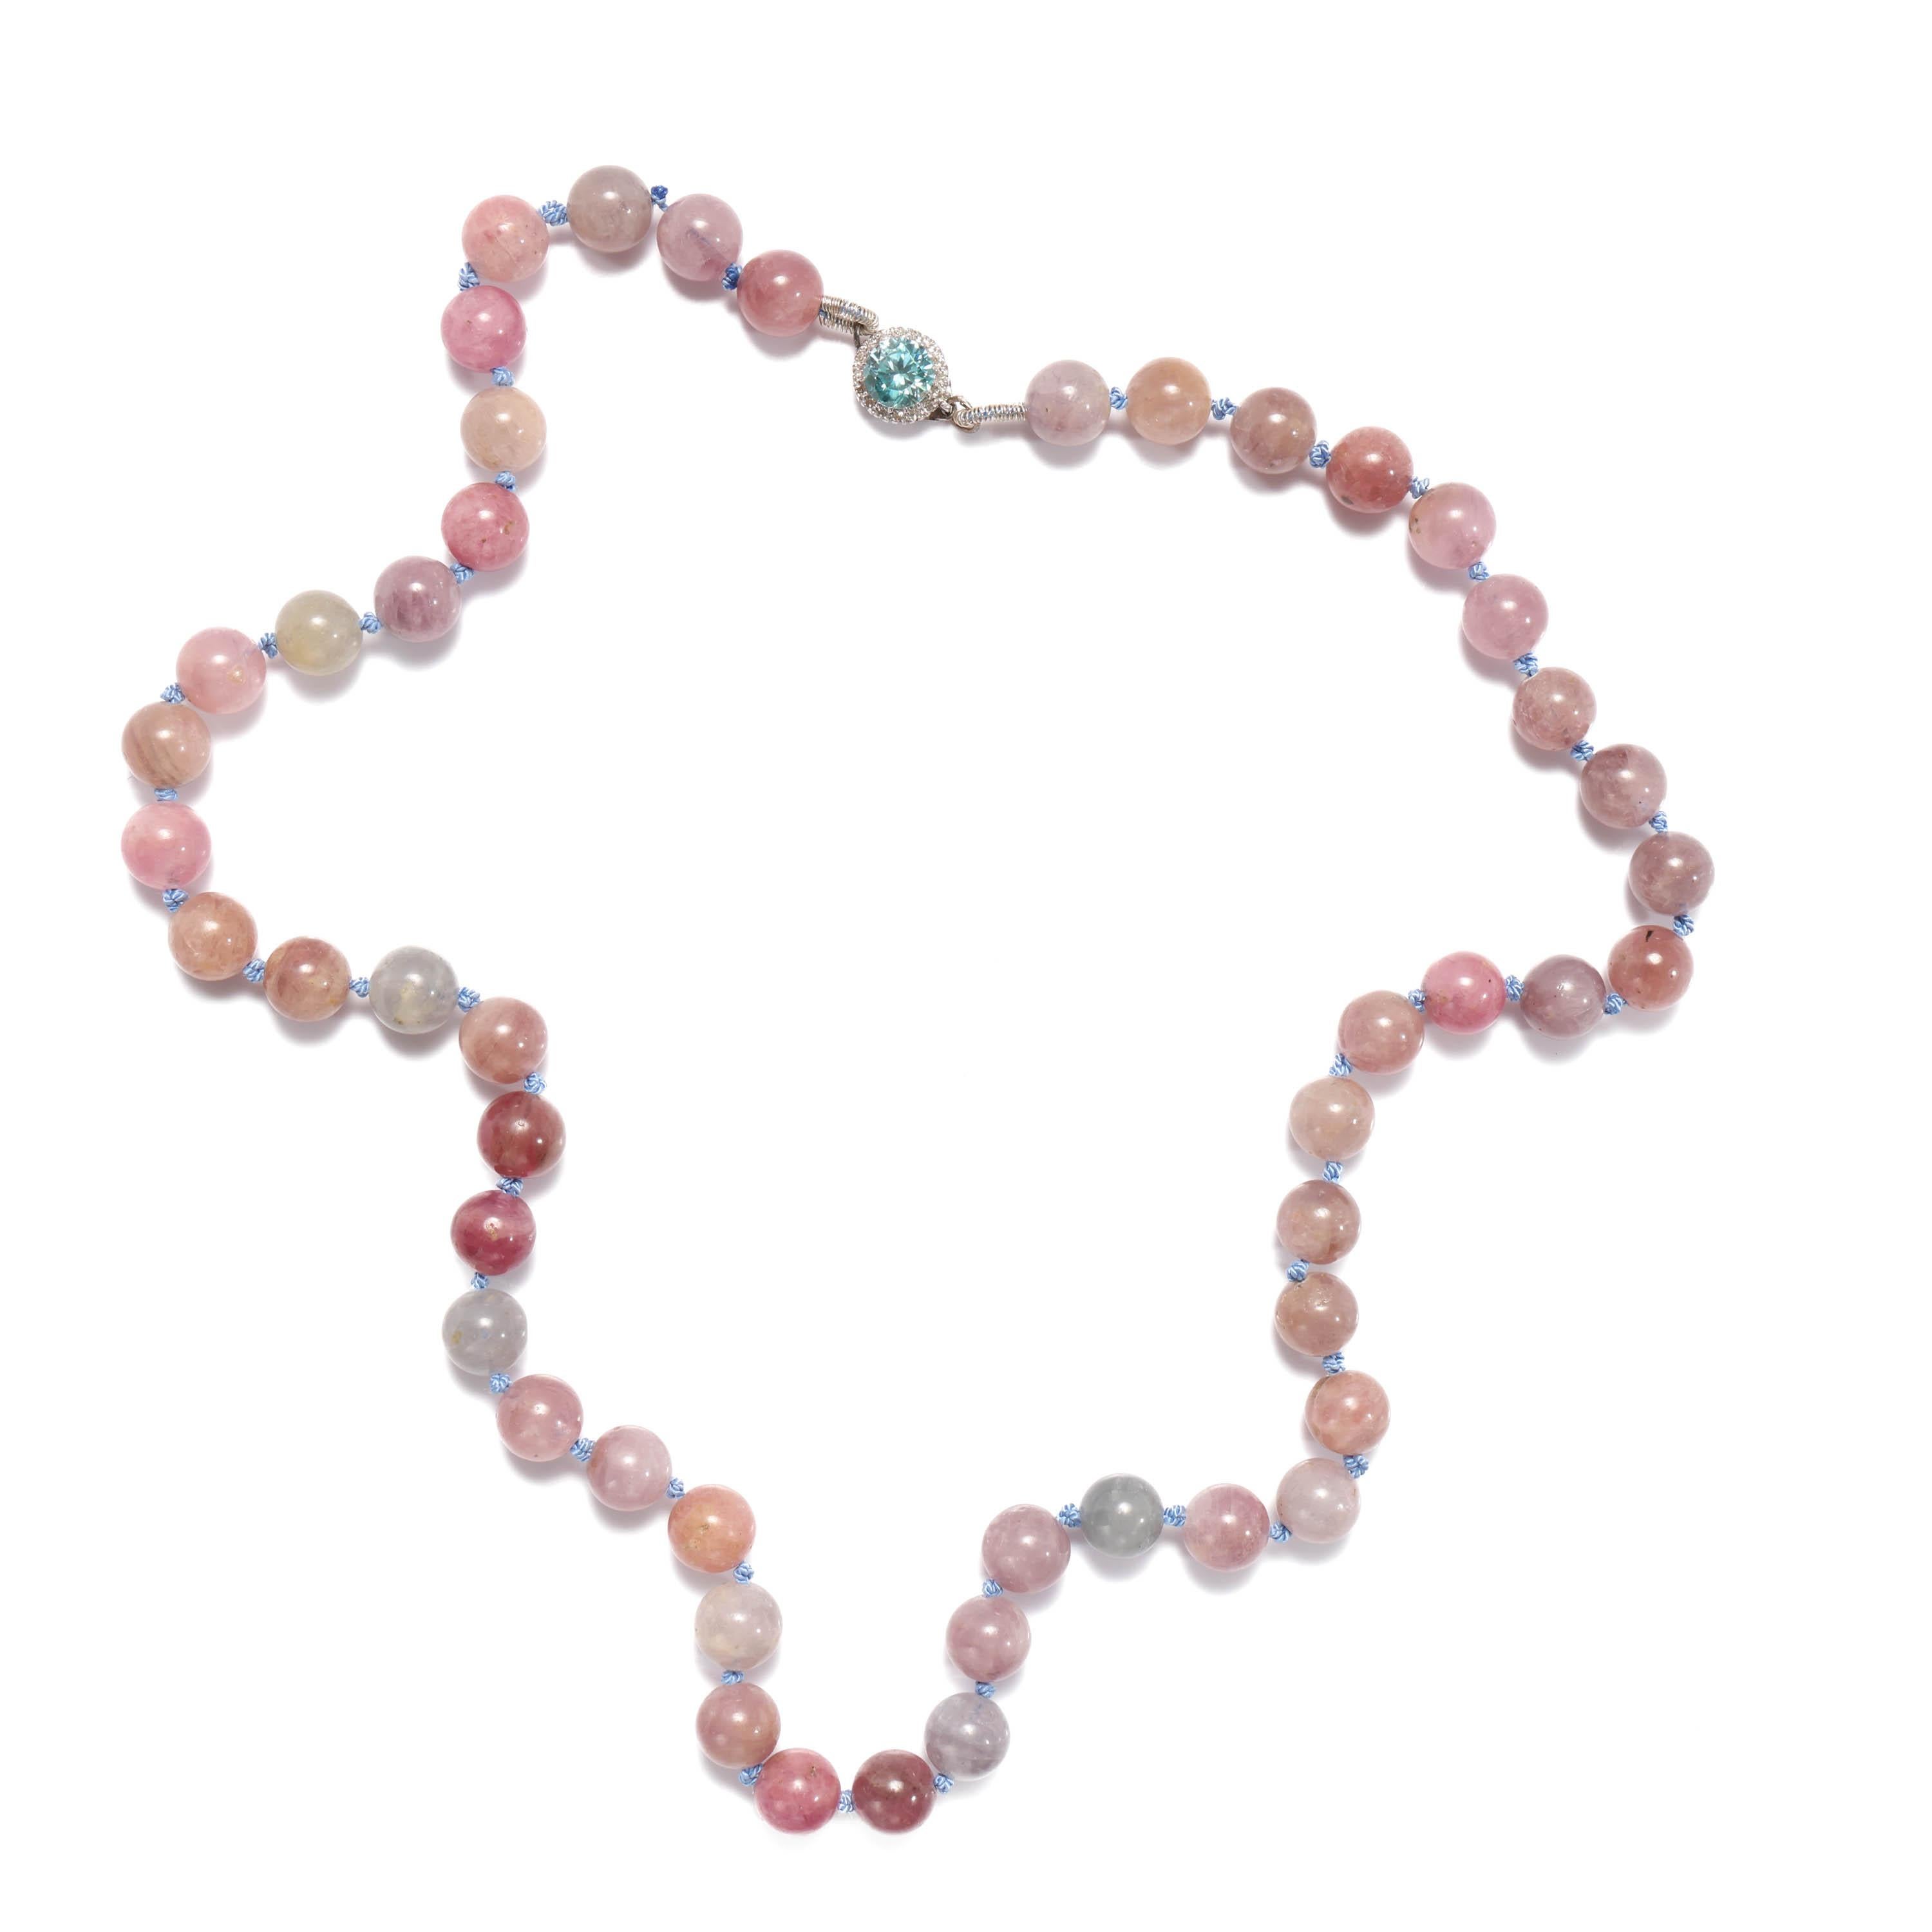 A stunning and entirely unique unworn necklace made with 49 natural and certified unheated spinel beads in soft shades of pink, lavender-gray, light purple, soft copper, and raspberry red. The nuanced palate of these beads is perfectly complimented